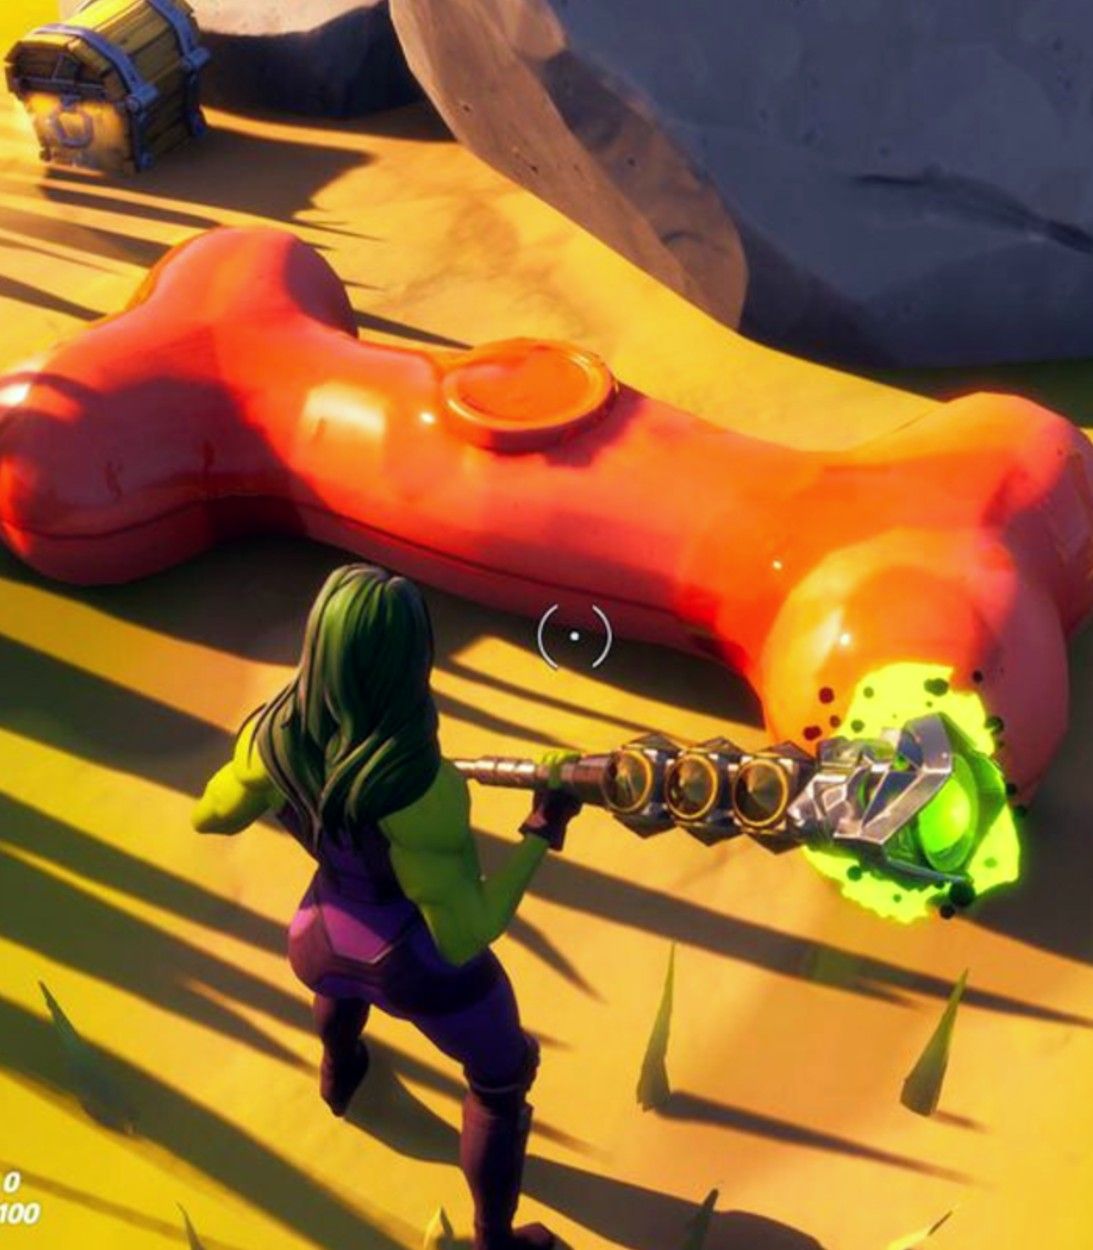 A player dressed as She-Hulk finds a rubber bone at Ant Manor in Fortnite Season 4